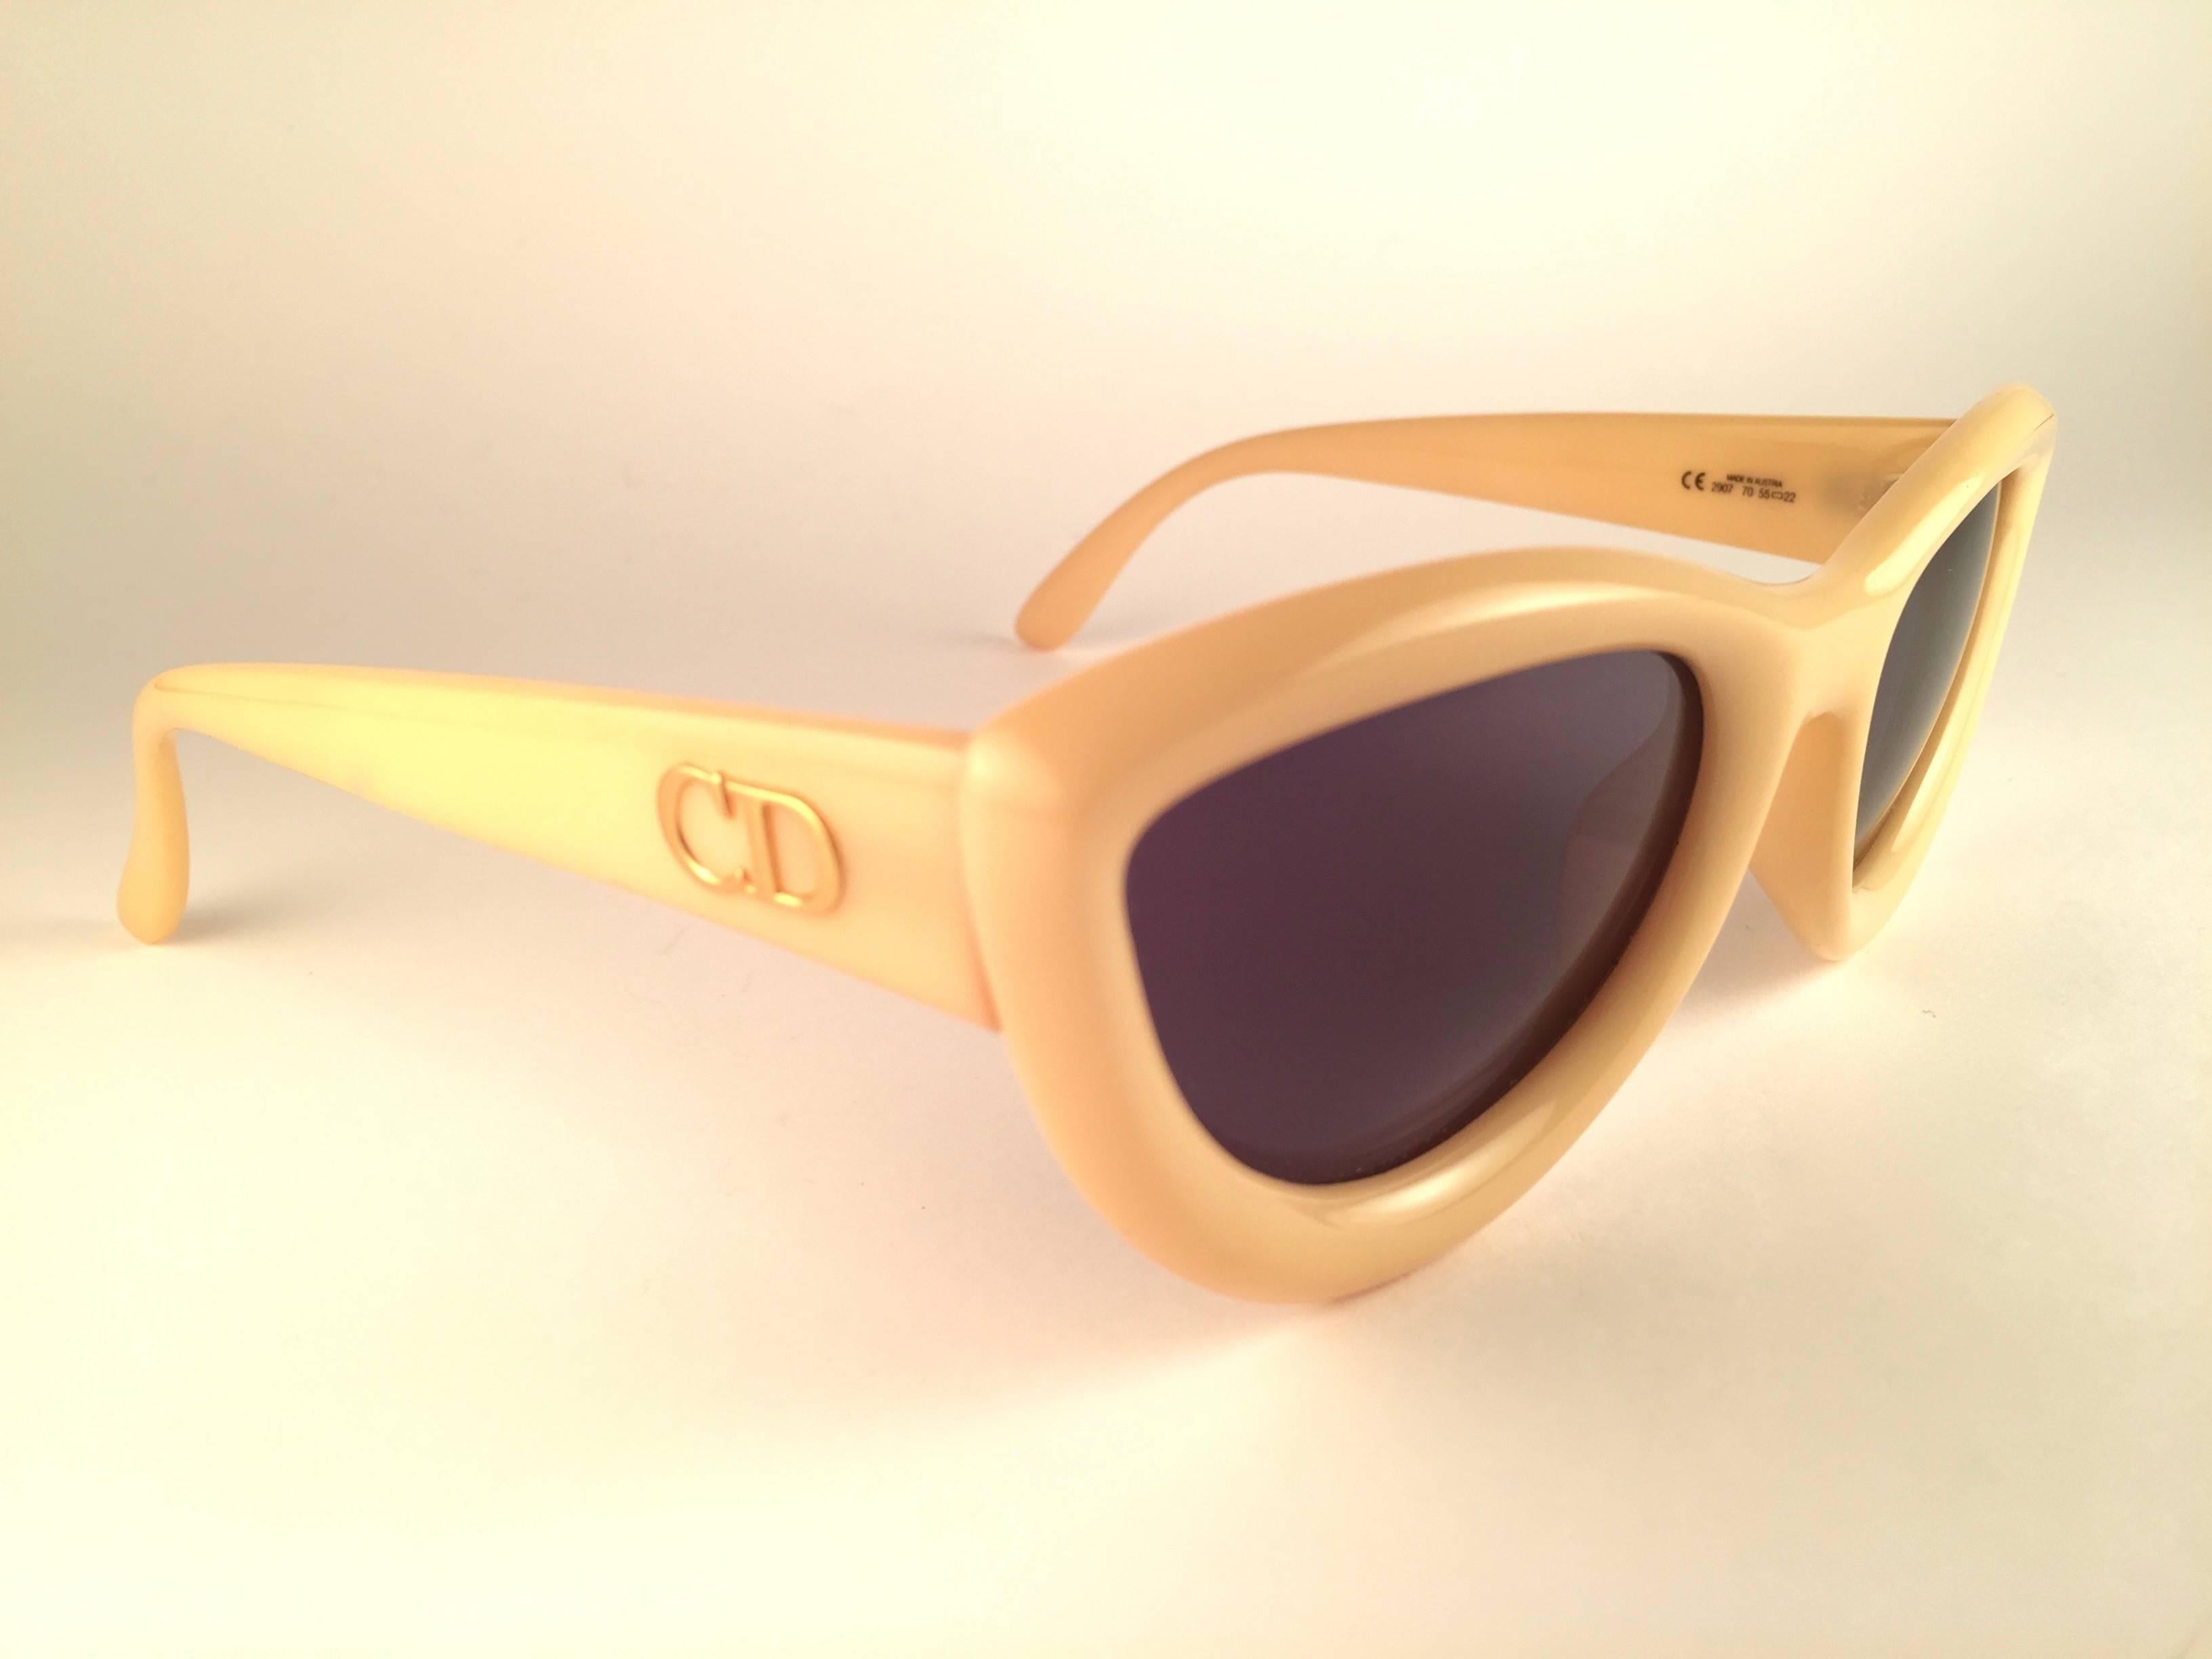 New Vintage Christian Dior 2907 70 Beige Cate eye frame with spotless deep brown lenses.   
Made in Austria.  
Produced and design in 1990's.  
New, never worn or displayed.
Comes with its original silver Christian Dior Lunettes sleeve